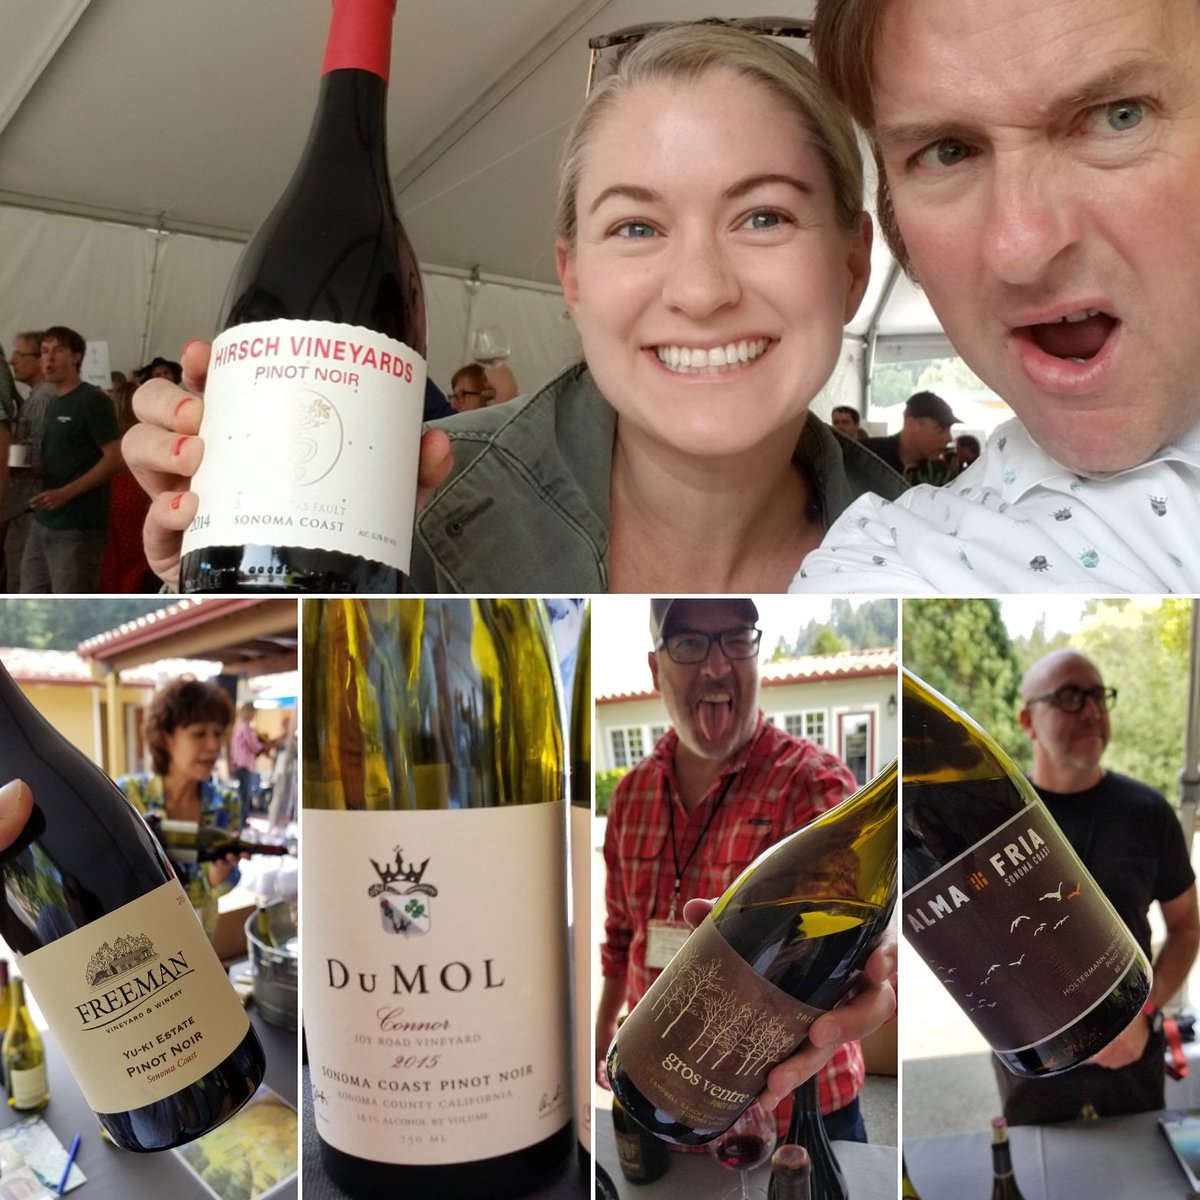 Just a reminder that #PinotNoirDay is everyday from #SawyerSomm, #SOMMJournal and the fun-lovin members of the #WestSonomaCoastVintners! #WestSonomaCoast #SawyerSelfie #NationalPinotNoirDay #SommJournal #MyWineSociety